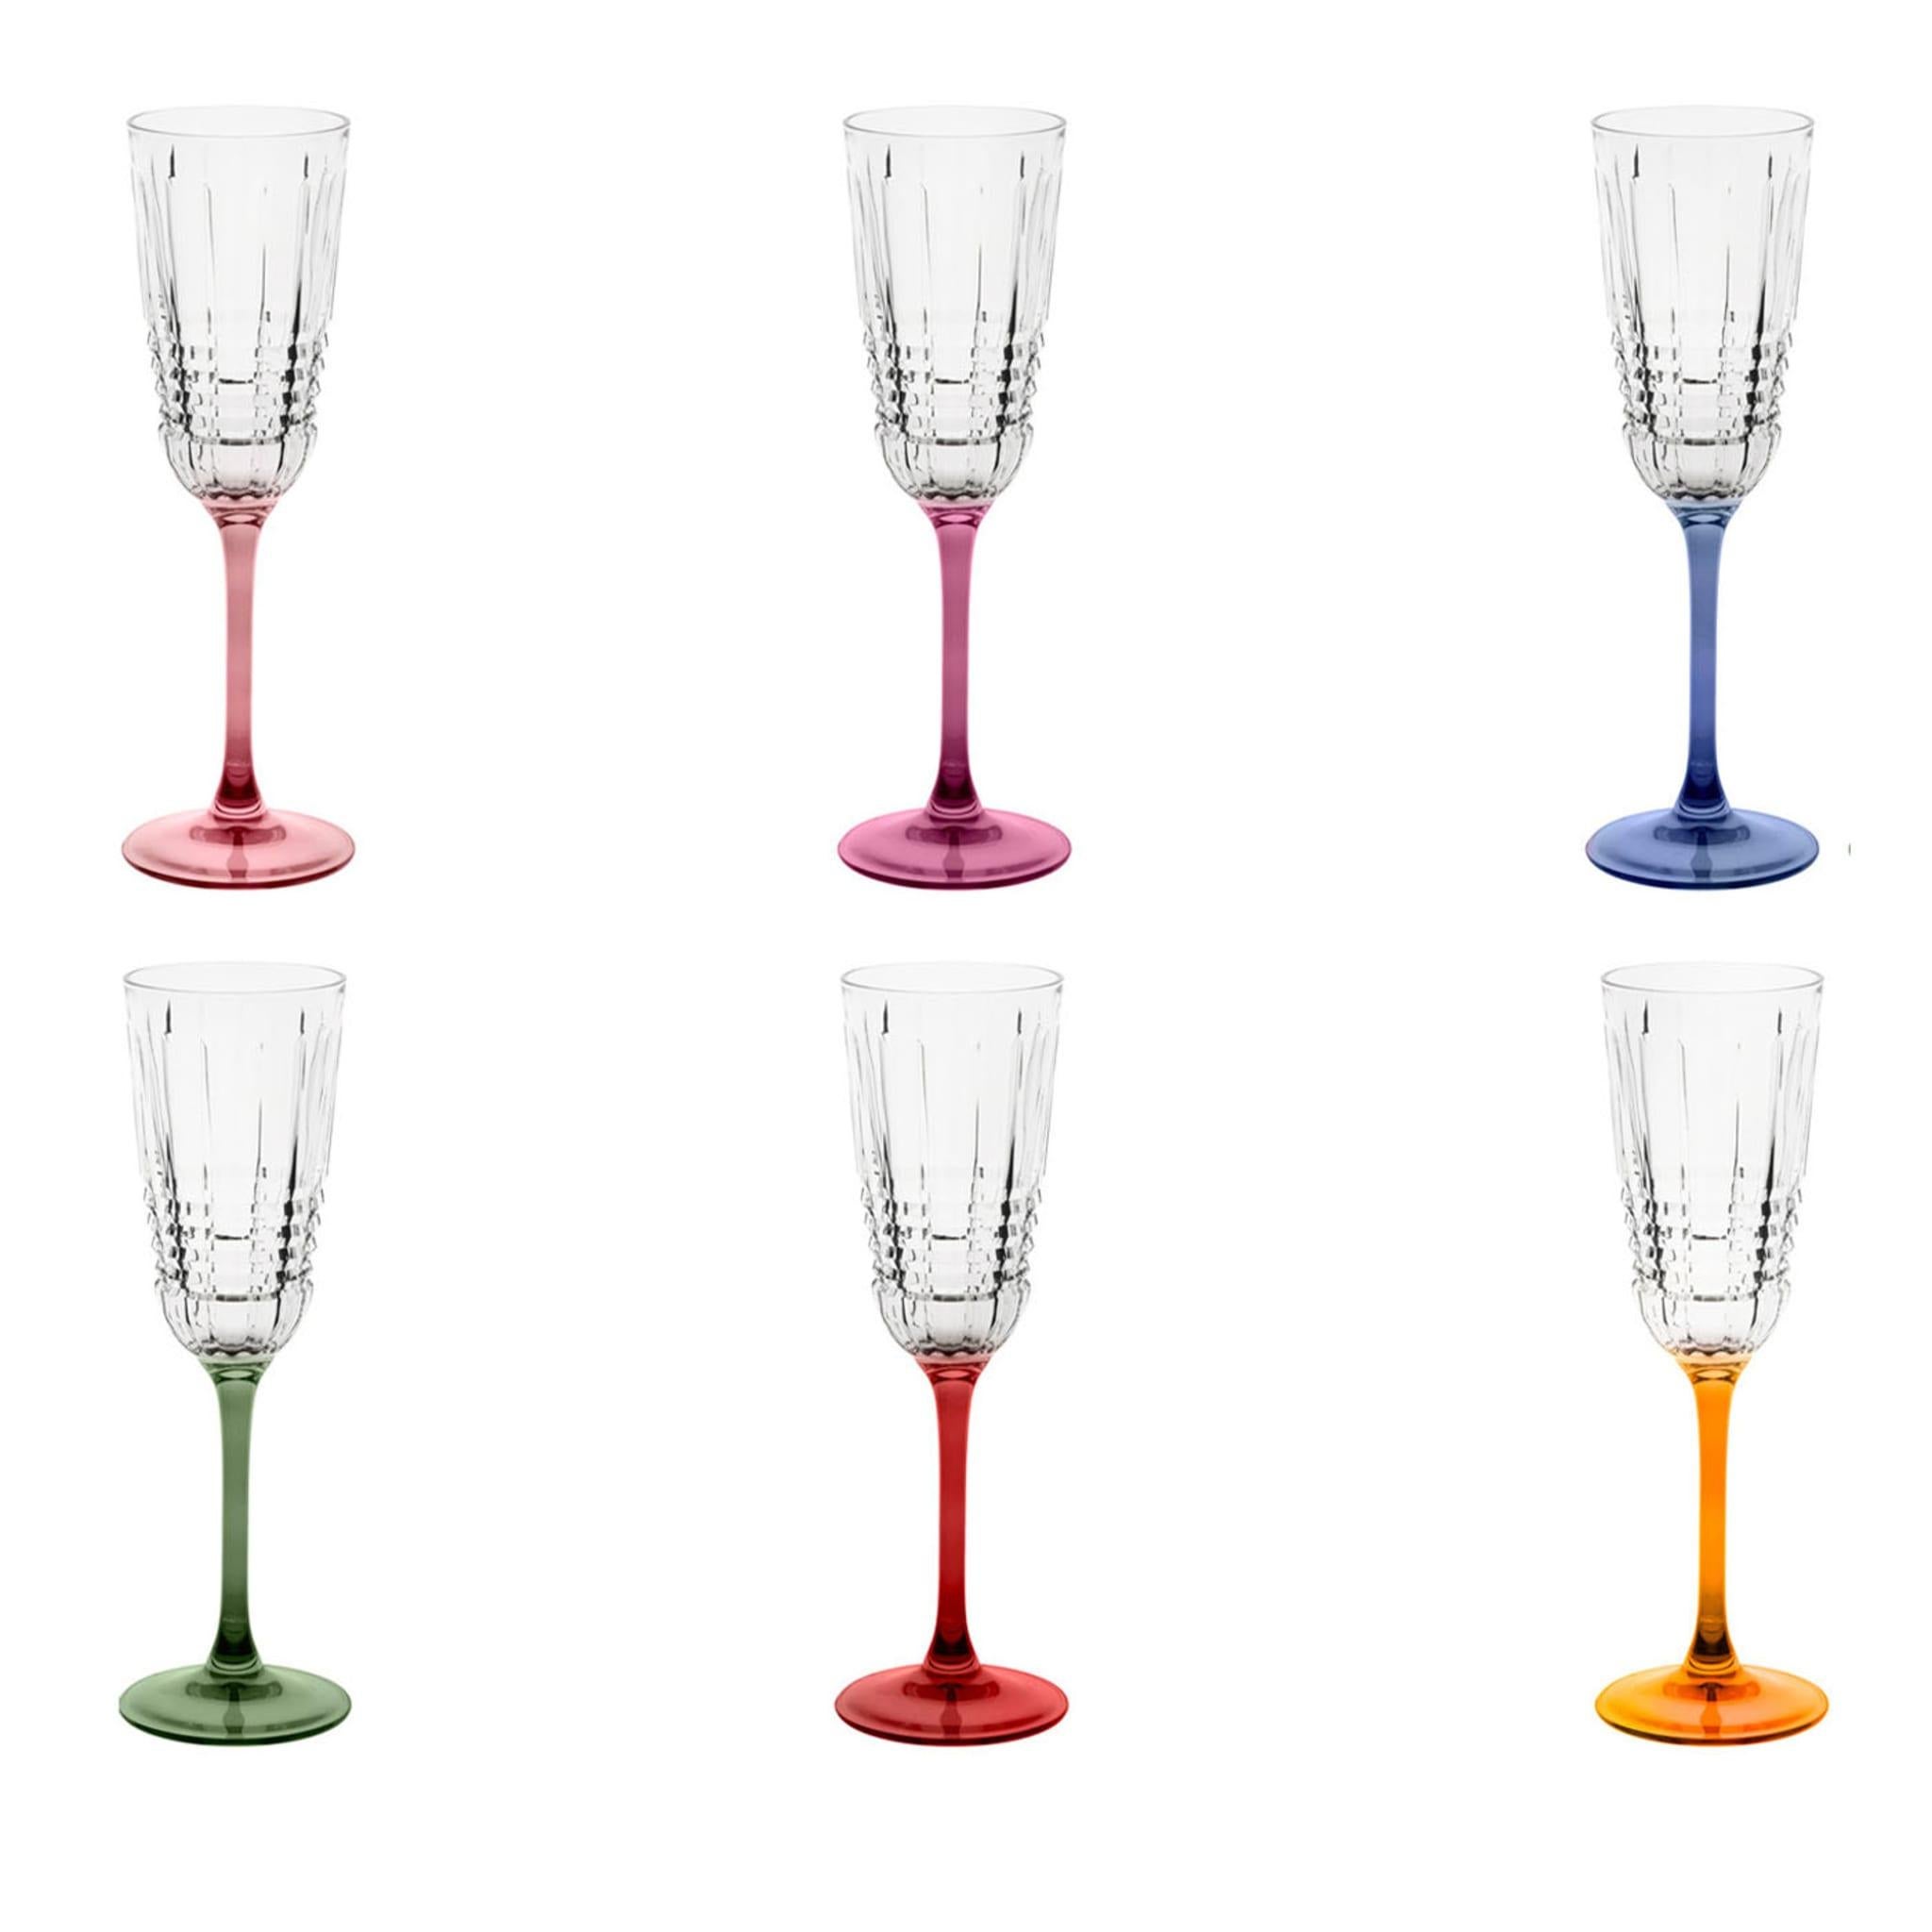 Traditional allure and eclectic style effortlessly come together in this elegant set of six champagne flutes. Exquisitely crafted of crystal, each flutes boasts a different vibrant shade for foot and stem, while the transparent bowl is superbly